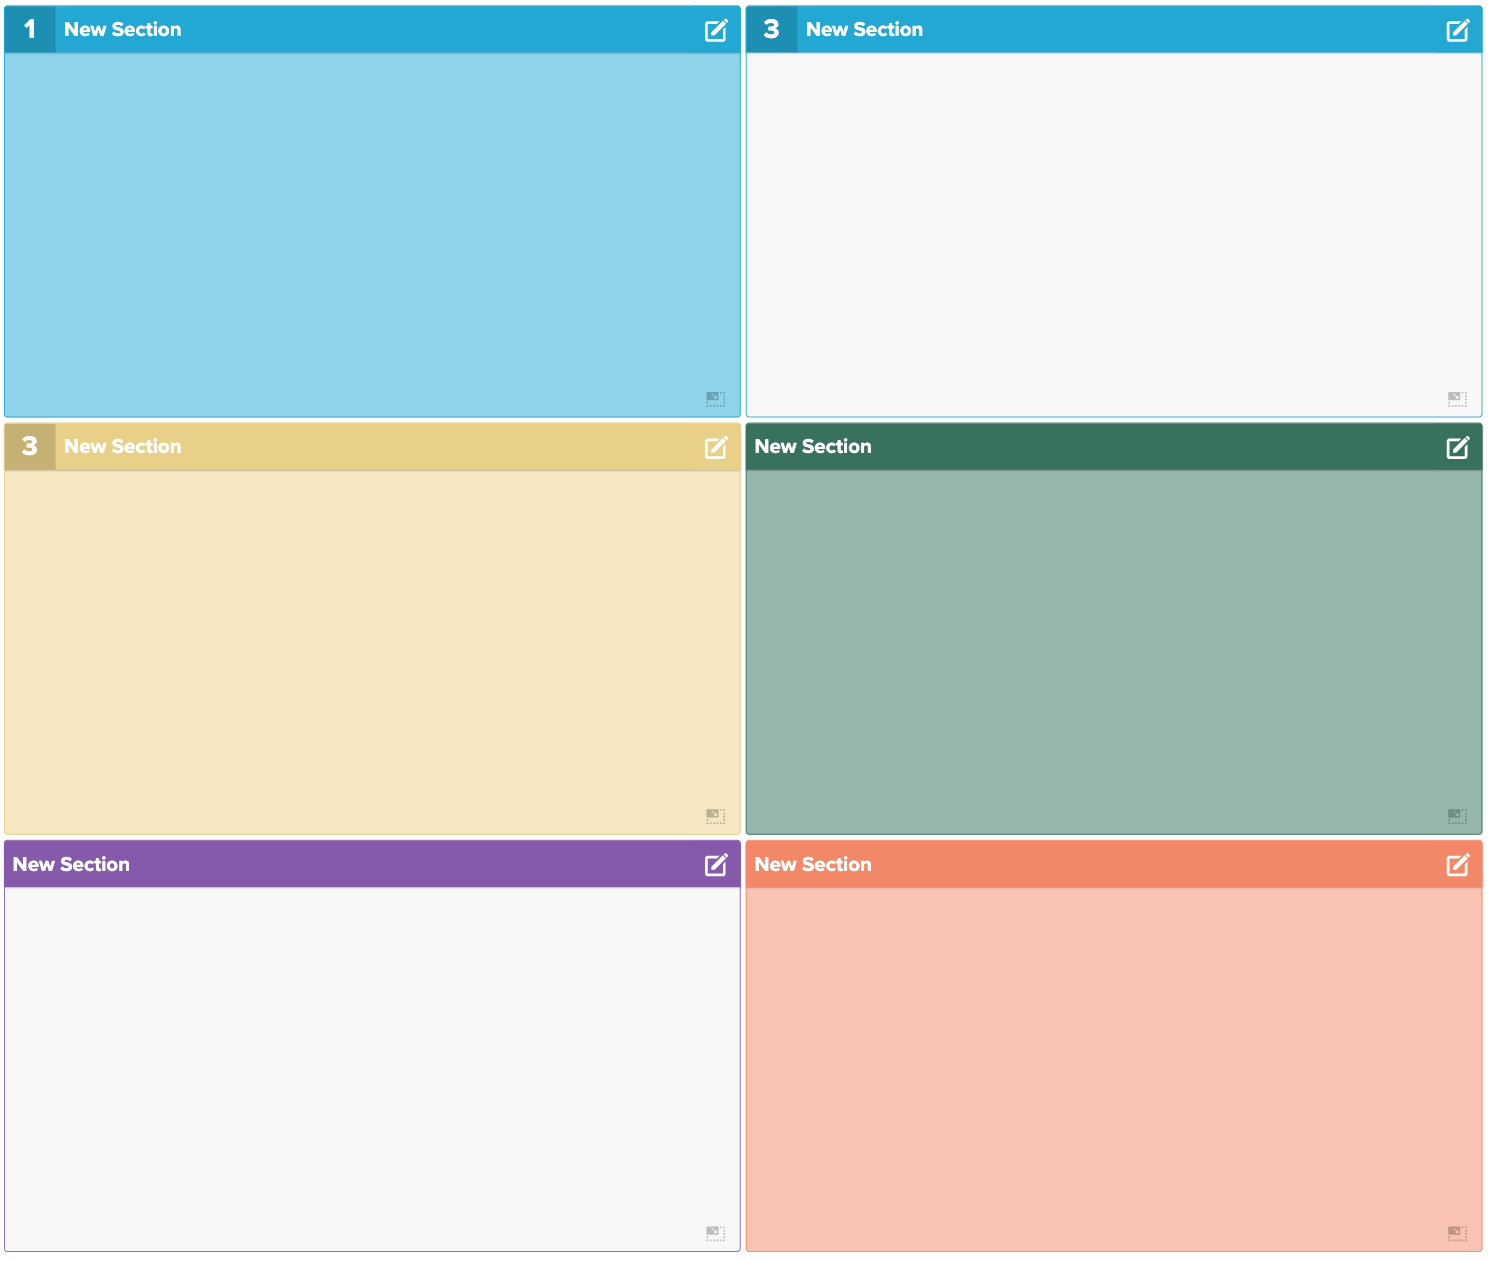 Multiple template sections with different colors